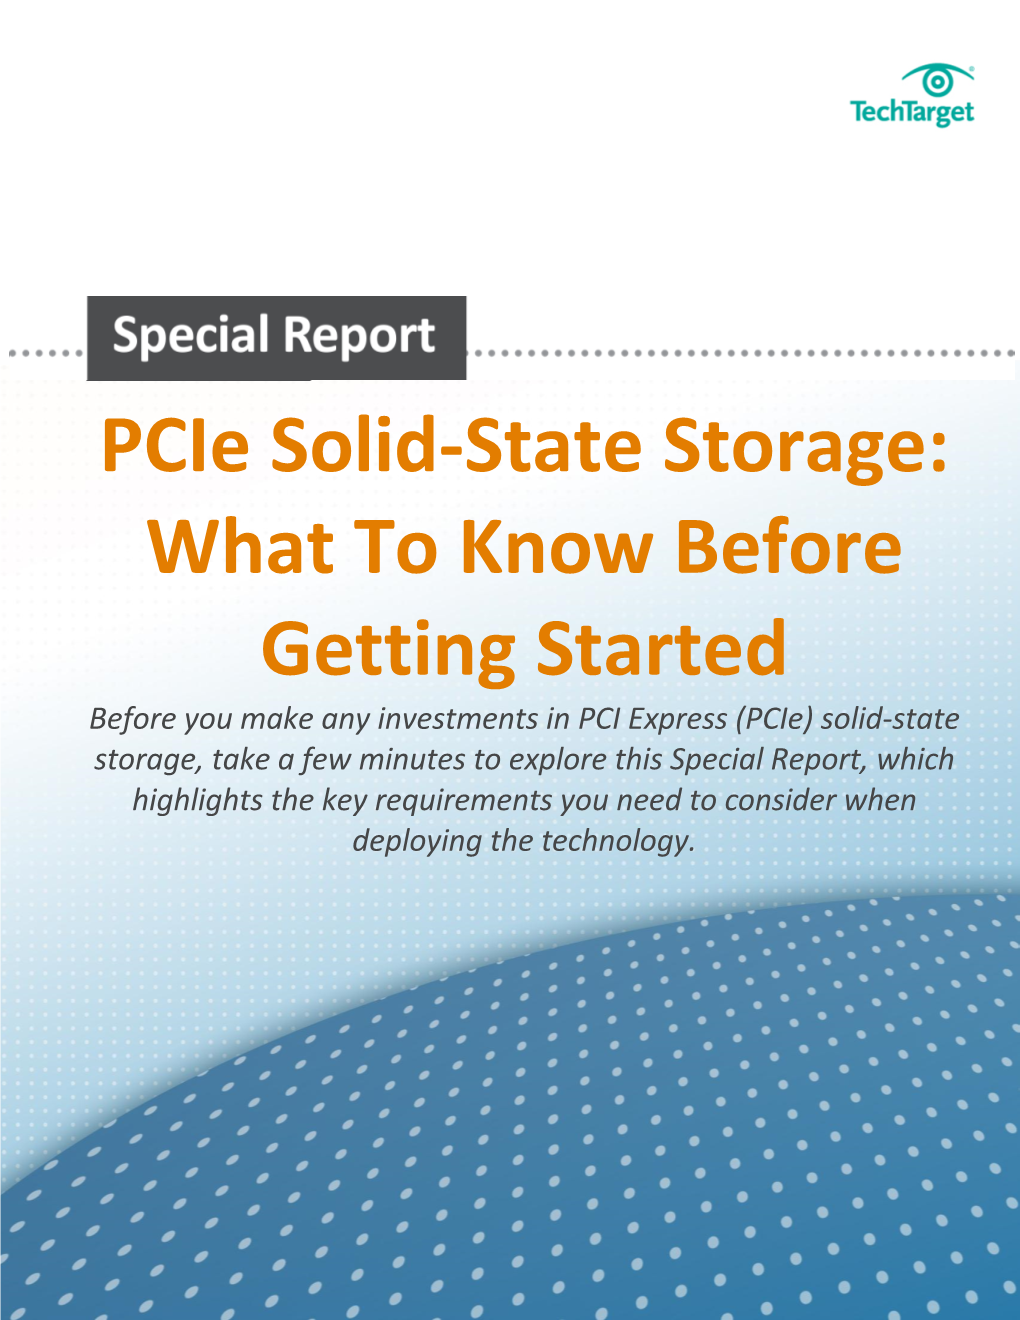 Pcie Solid-State Storage: What to Know Before Getting Started